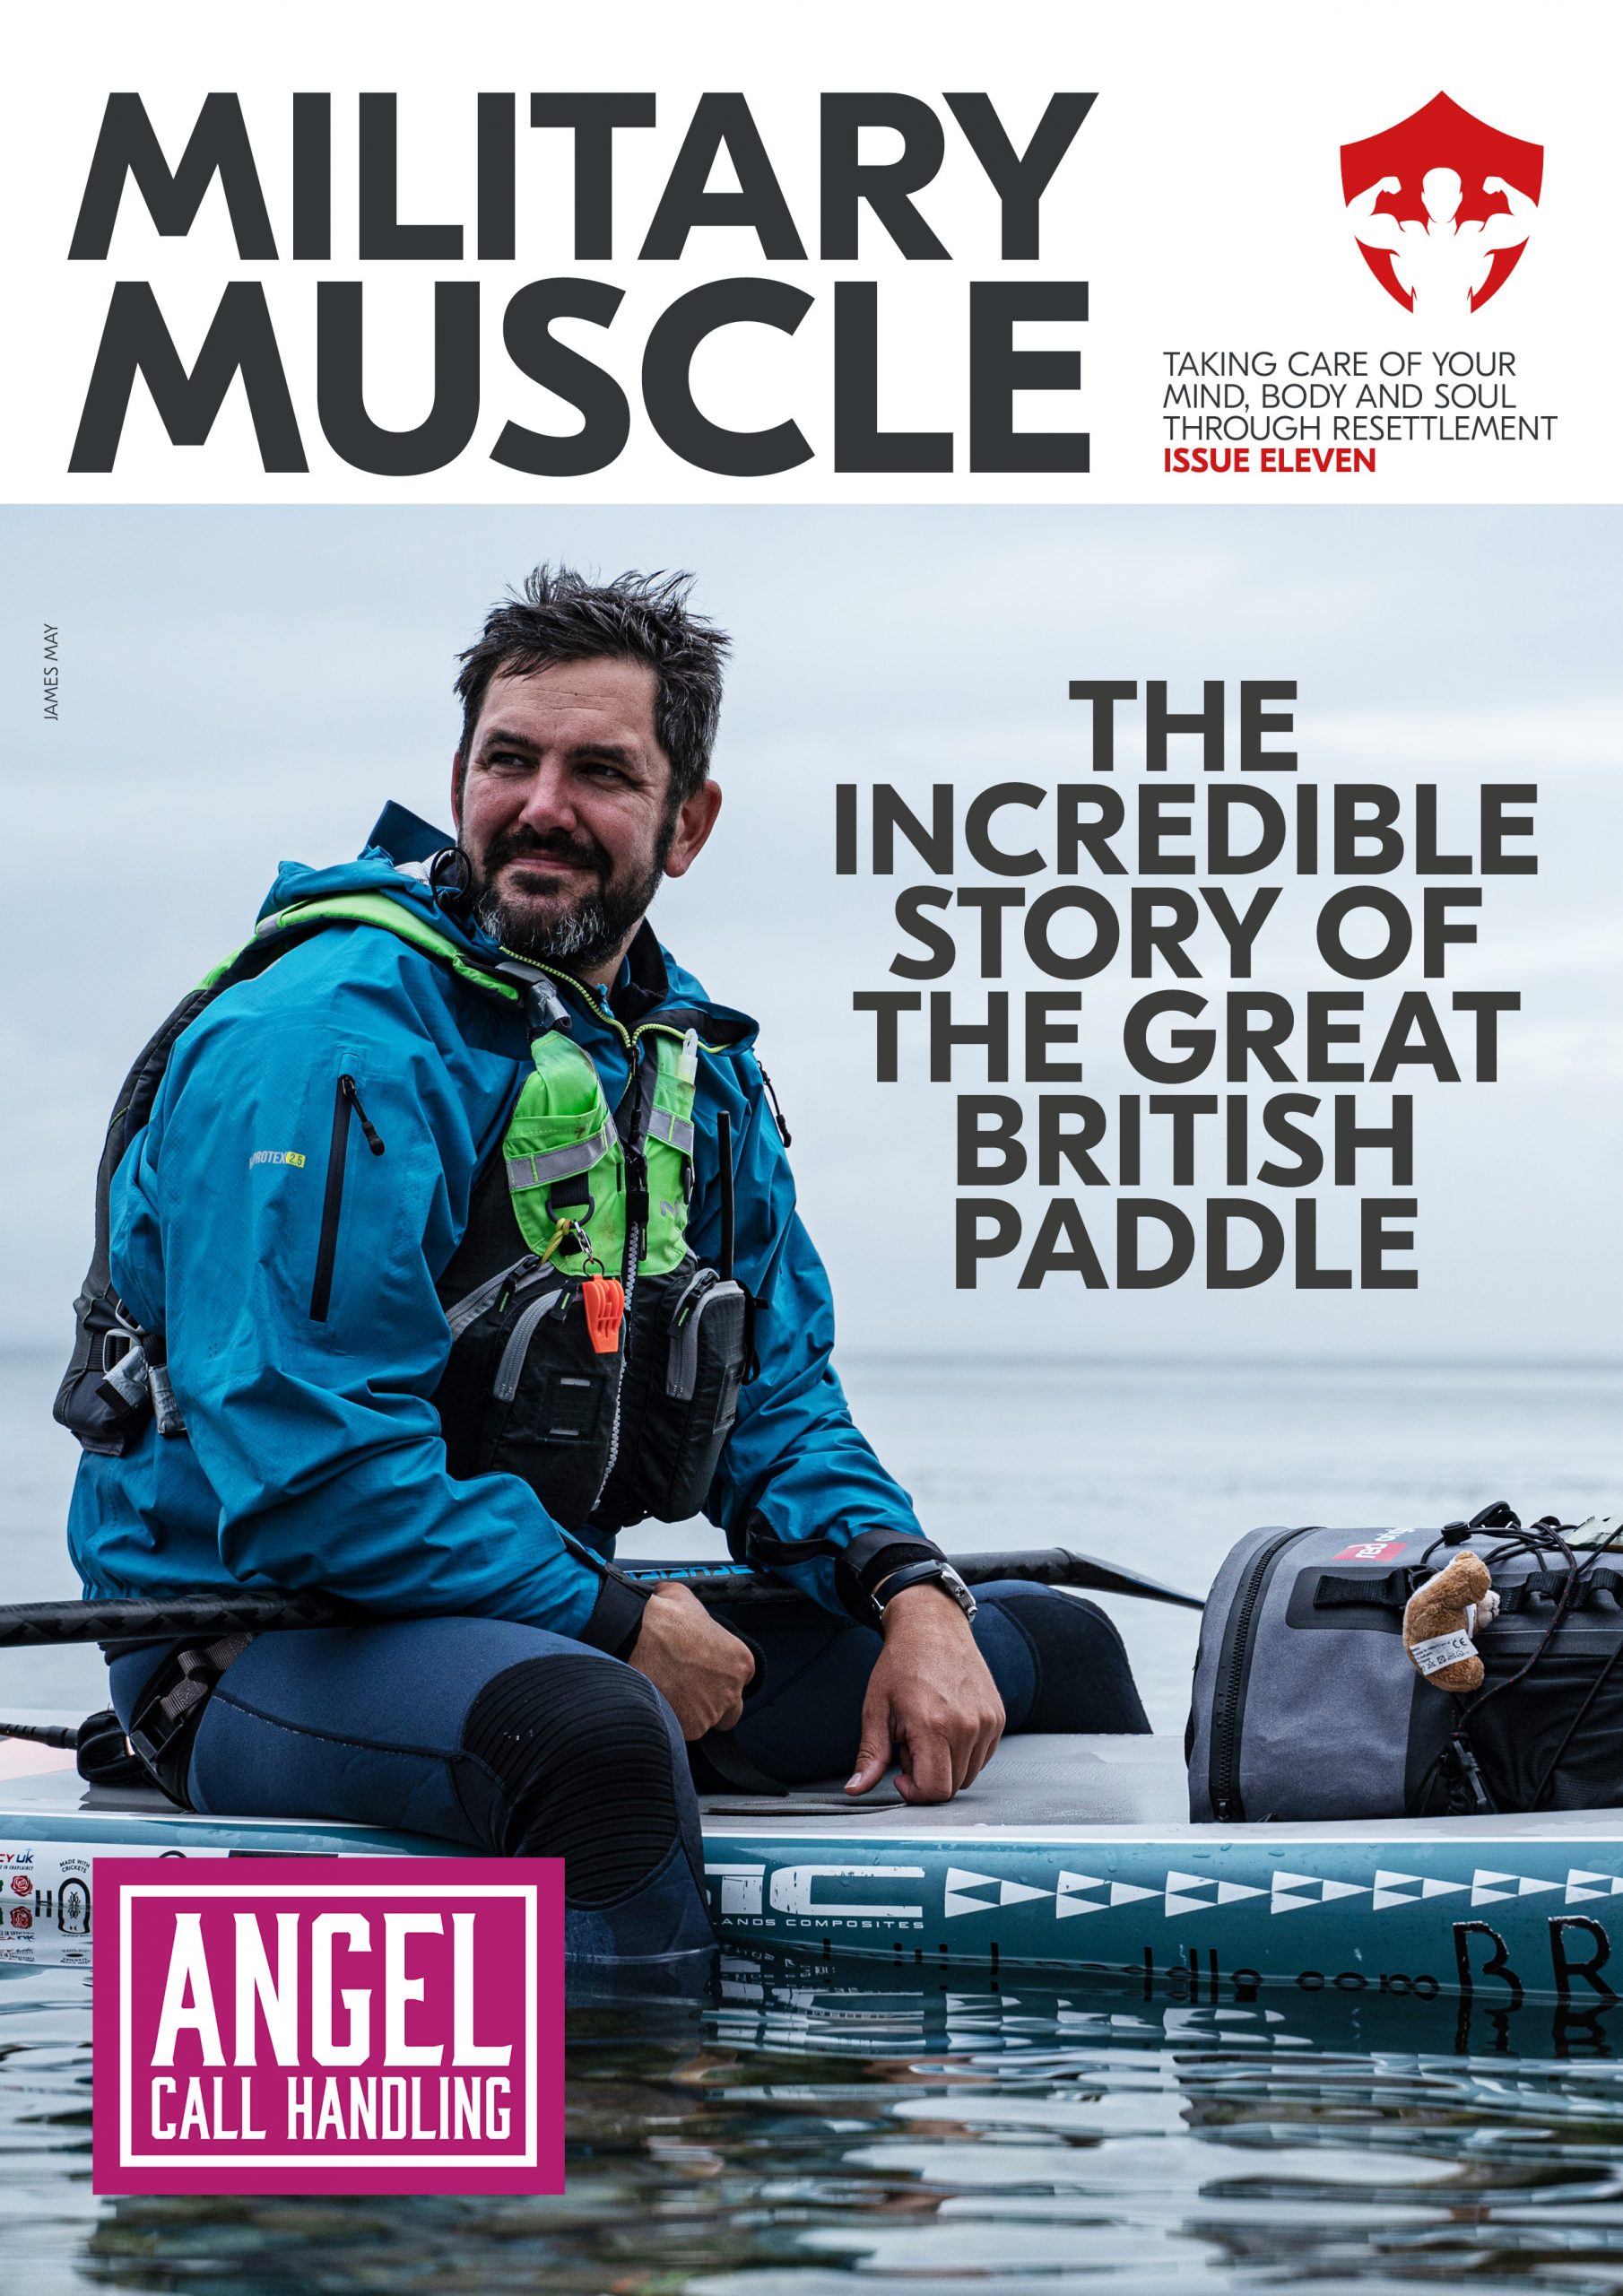 Jordan Wylie: Remember Your Why! The Story Of The Great British Paddle